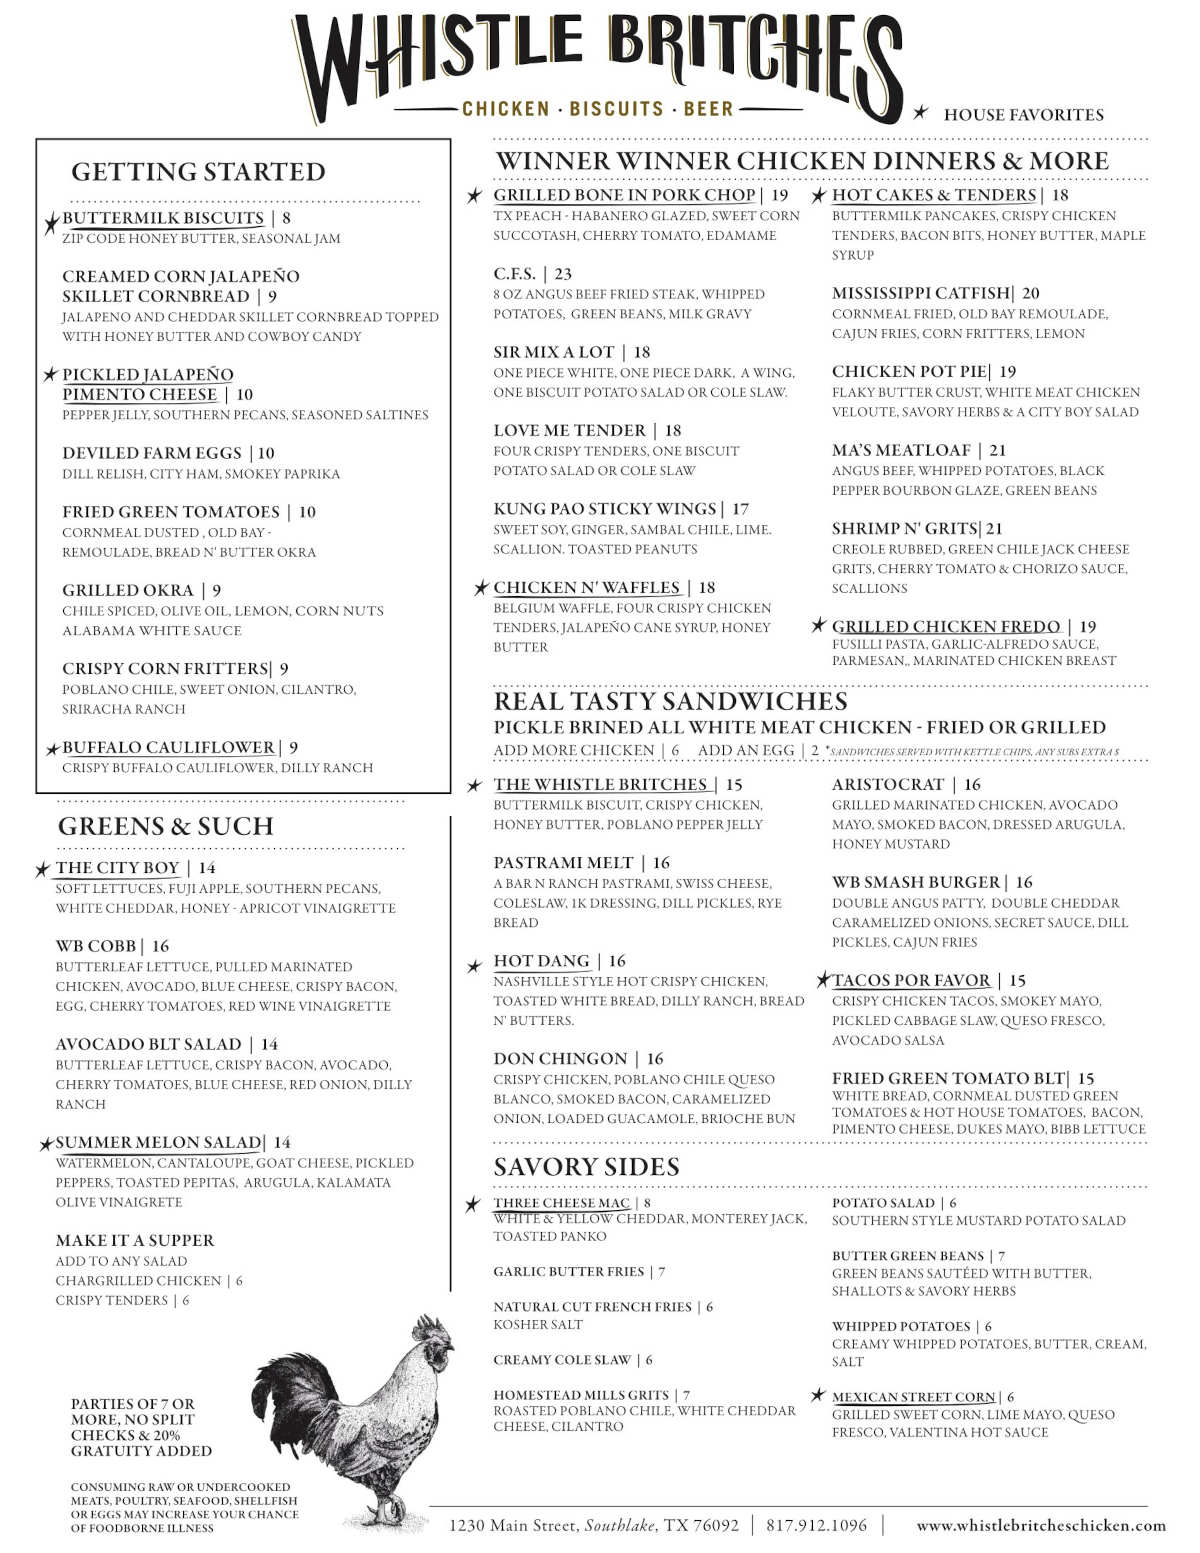 Whistle Britches lunch and dinner menu 3